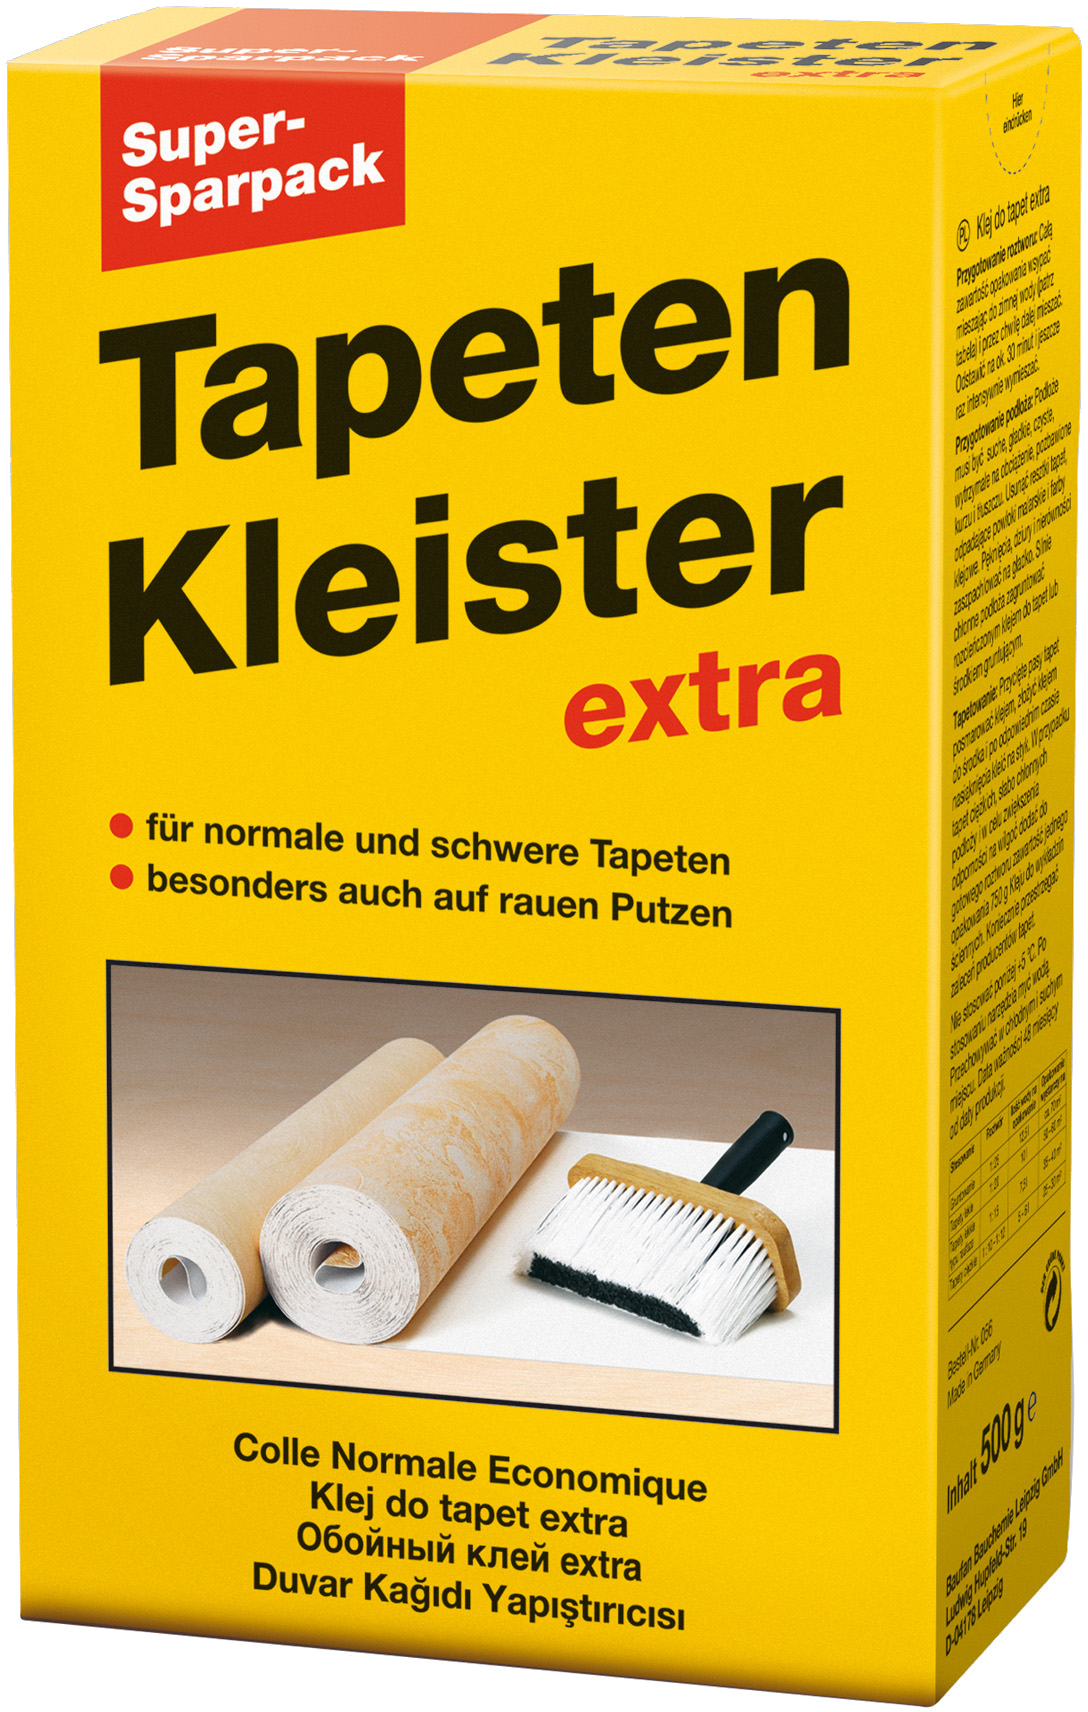 Baufan Extra Tapetenkleister Sparpack